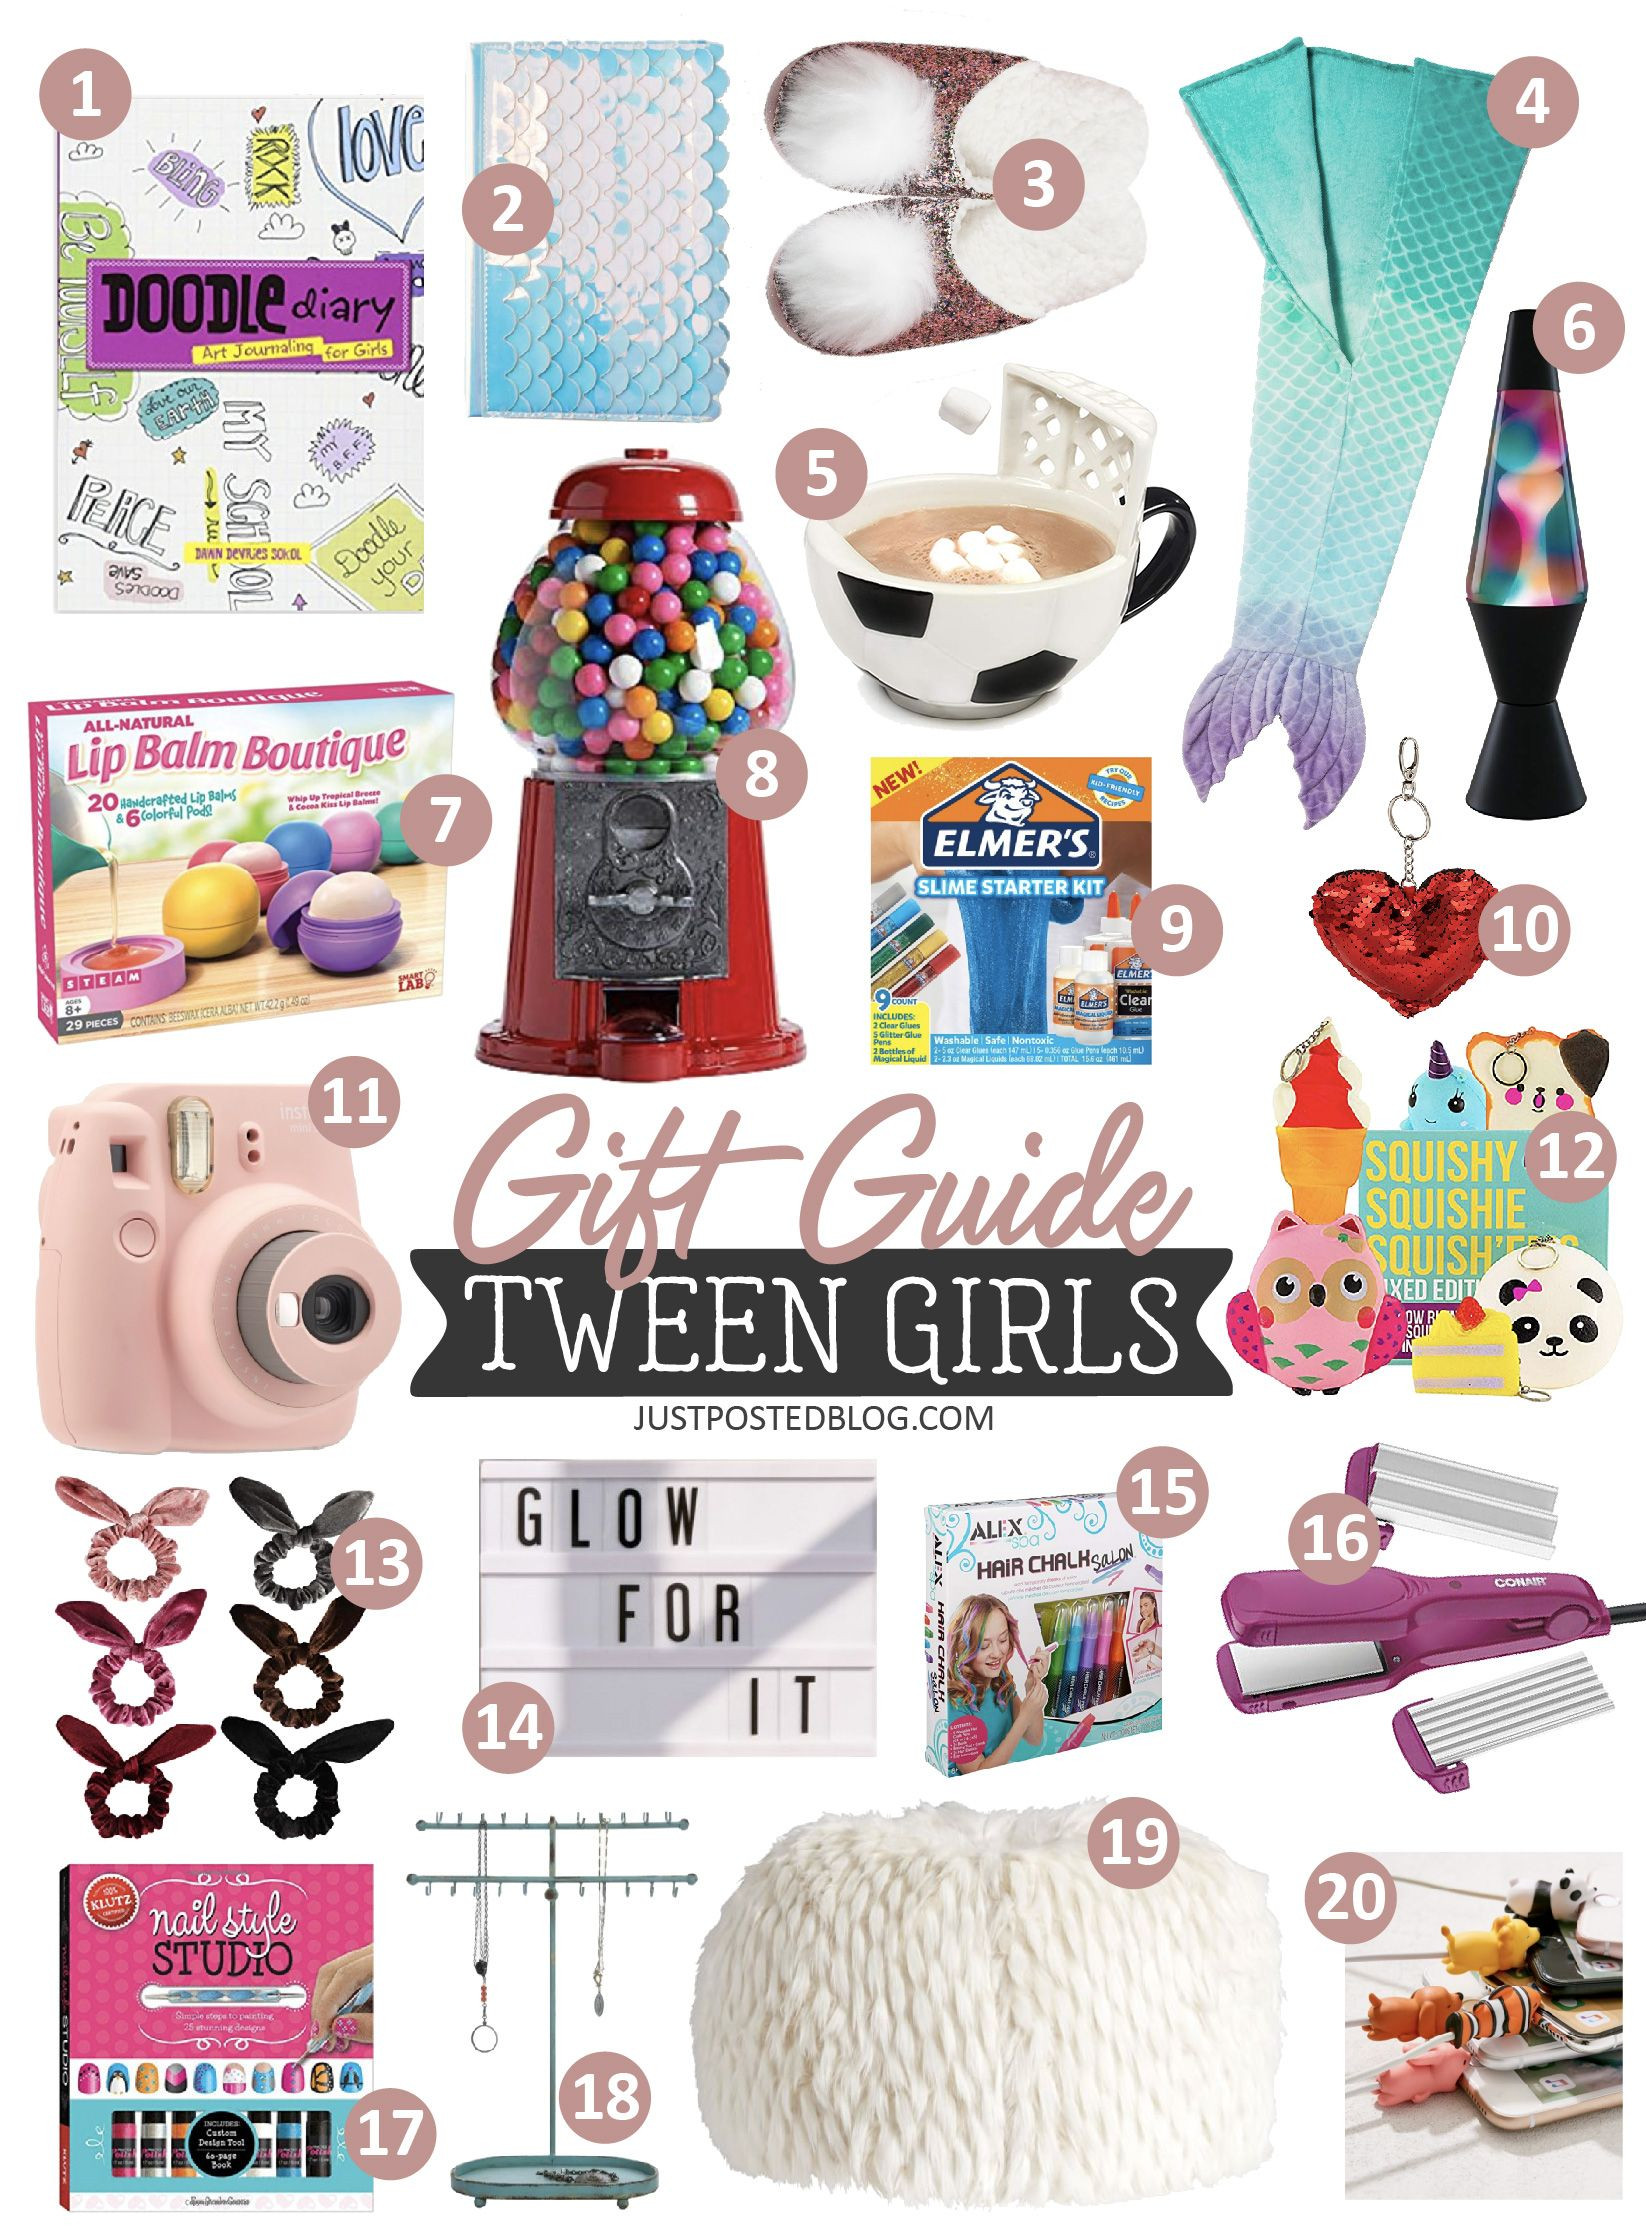 Best Gift Ideas For Tween Girls
 Gift Guide for Tween Girls • 20 Items • Perfect for a